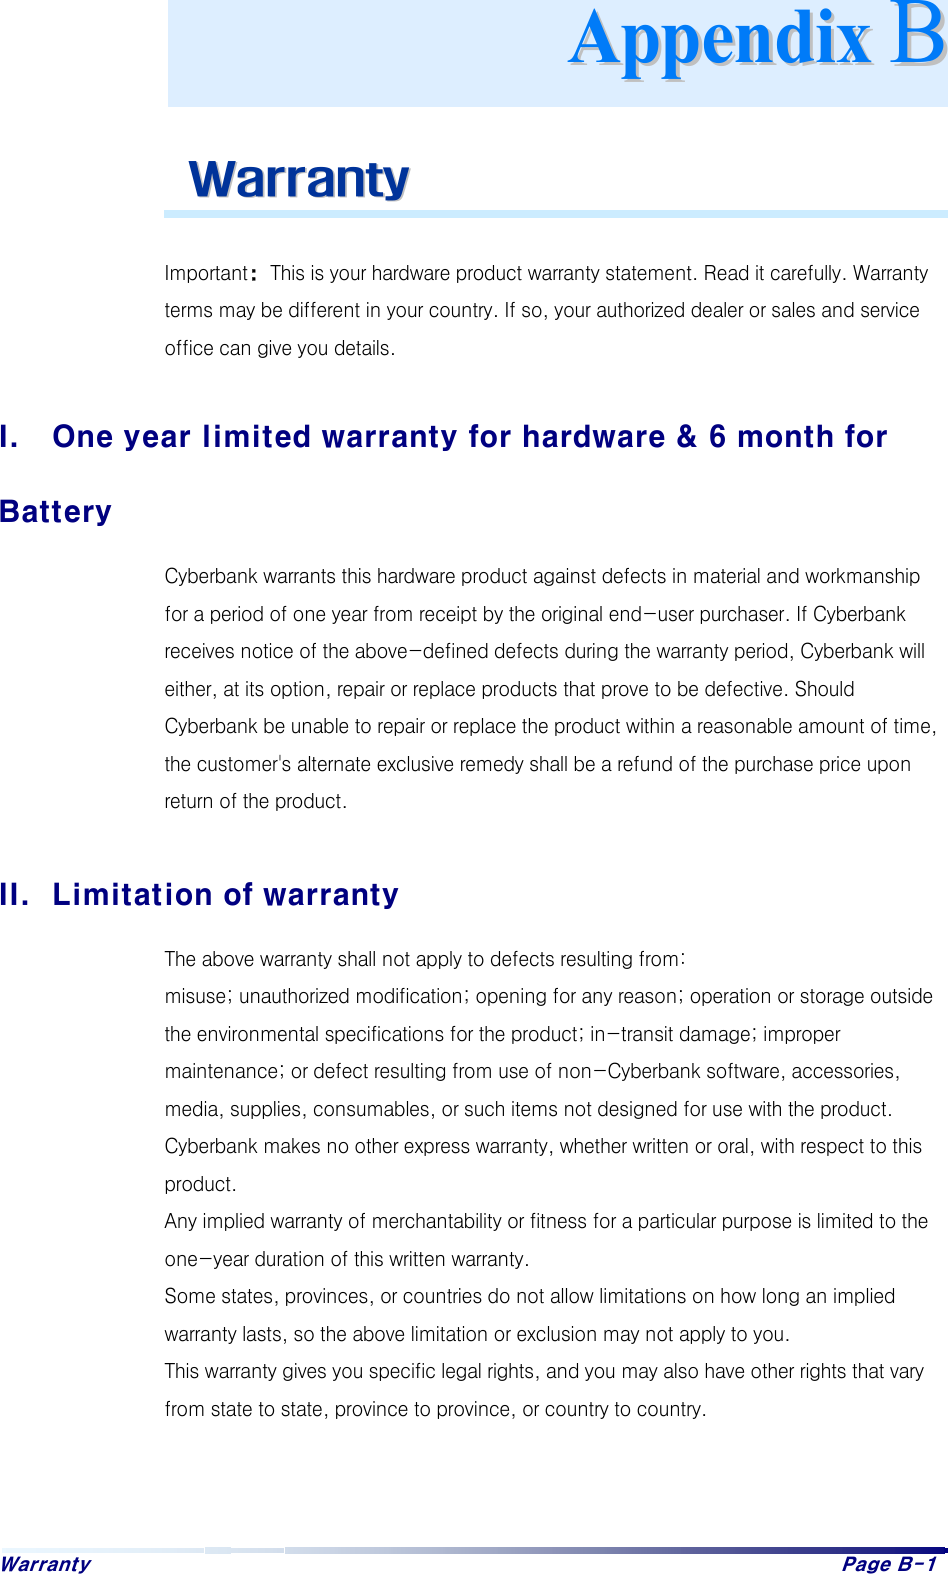 Warranty    Page B-1      WWaarrrraannttyy   Important: This is your hardware product warranty statement. Read it carefully. Warranty terms may be different in your country. If so, your authorized dealer or sales and service office can give you details.  I.  One year limited warranty for hardware &amp; 6 month for Battery Cyberbank warrants this hardware product against defects in material and workmanship for a period of one year from receipt by the original end-user purchaser. If Cyberbank receives notice of the above-defined defects during the warranty period, Cyberbank will either, at its option, repair or replace products that prove to be defective. Should Cyberbank be unable to repair or replace the product within a reasonable amount of time, the customer&apos;s alternate exclusive remedy shall be a refund of the purchase price upon return of the product.  II.  Limitation of warranty The above warranty shall not apply to defects resulting from: misuse; unauthorized modification; opening for any reason; operation or storage outside the environmental specifications for the product; in-transit damage; improper maintenance; or defect resulting from use of non-Cyberbank software, accessories, media, supplies, consumables, or such items not designed for use with the product. Cyberbank makes no other express warranty, whether written or oral, with respect to this product. Any implied warranty of merchantability or fitness for a particular purpose is limited to the one-year duration of this written warranty. Some states, provinces, or countries do not allow limitations on how long an implied warranty lasts, so the above limitation or exclusion may not apply to you. This warranty gives you specific legal rights, and you may also have other rights that vary from state to state, province to province, or country to country.   AAppppeennddiixx  BB